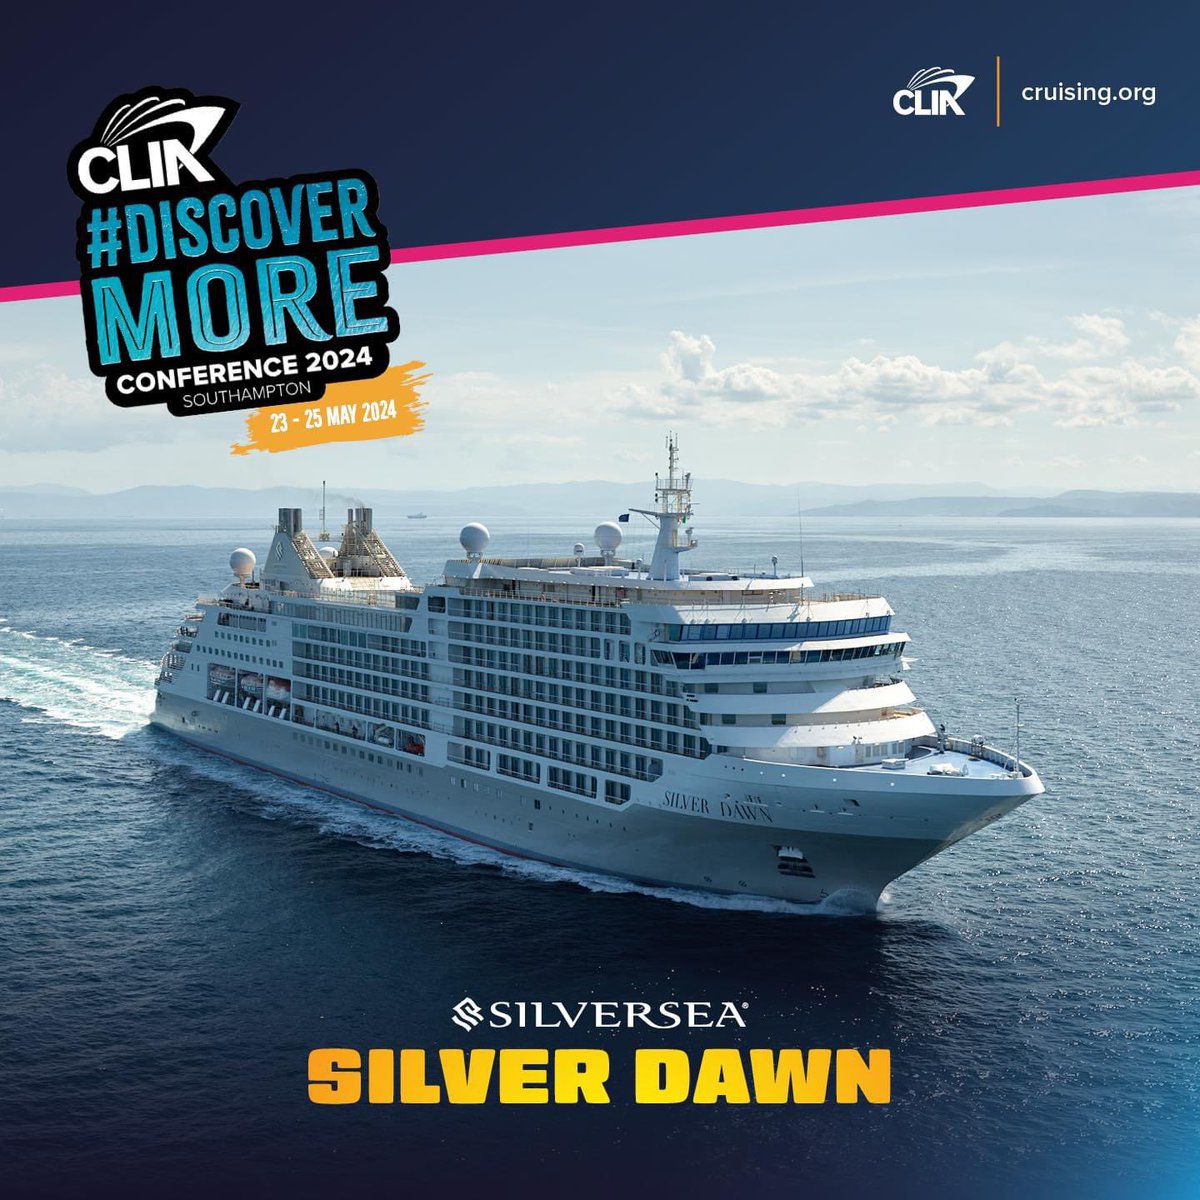 Day 2 of CLIA conference and we’re off to #DiscoverMore with a ship visit to the beautiful Silversea Silver Dawn Will post some pictures and updates of our time onboard later!